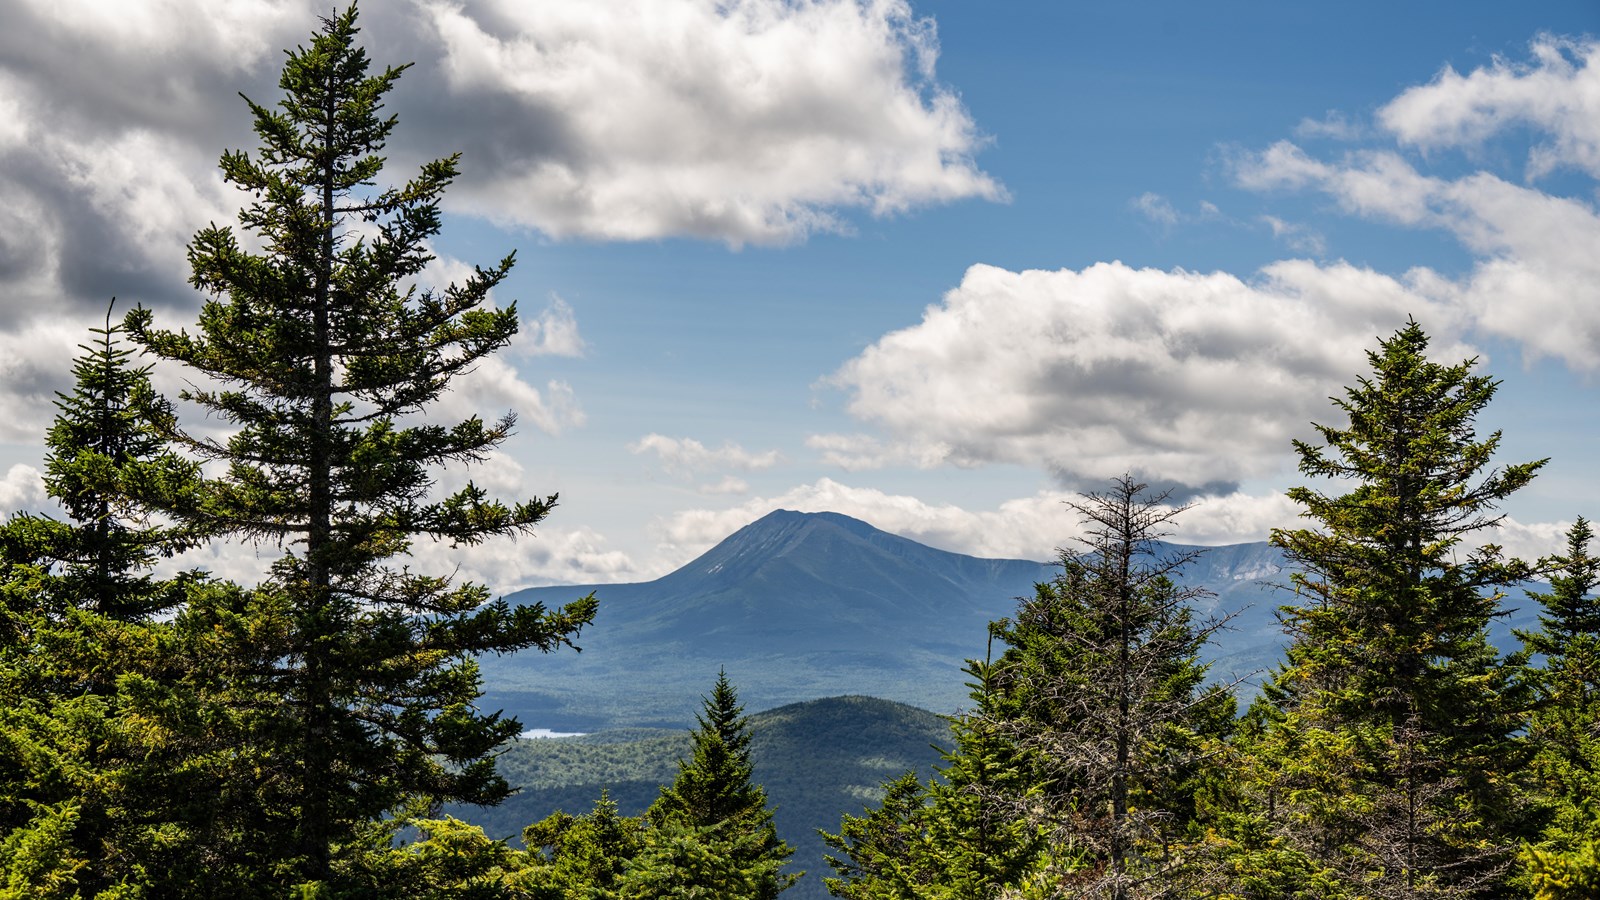 Tall pine trees frame a view of a green, peaked mountain in the distance